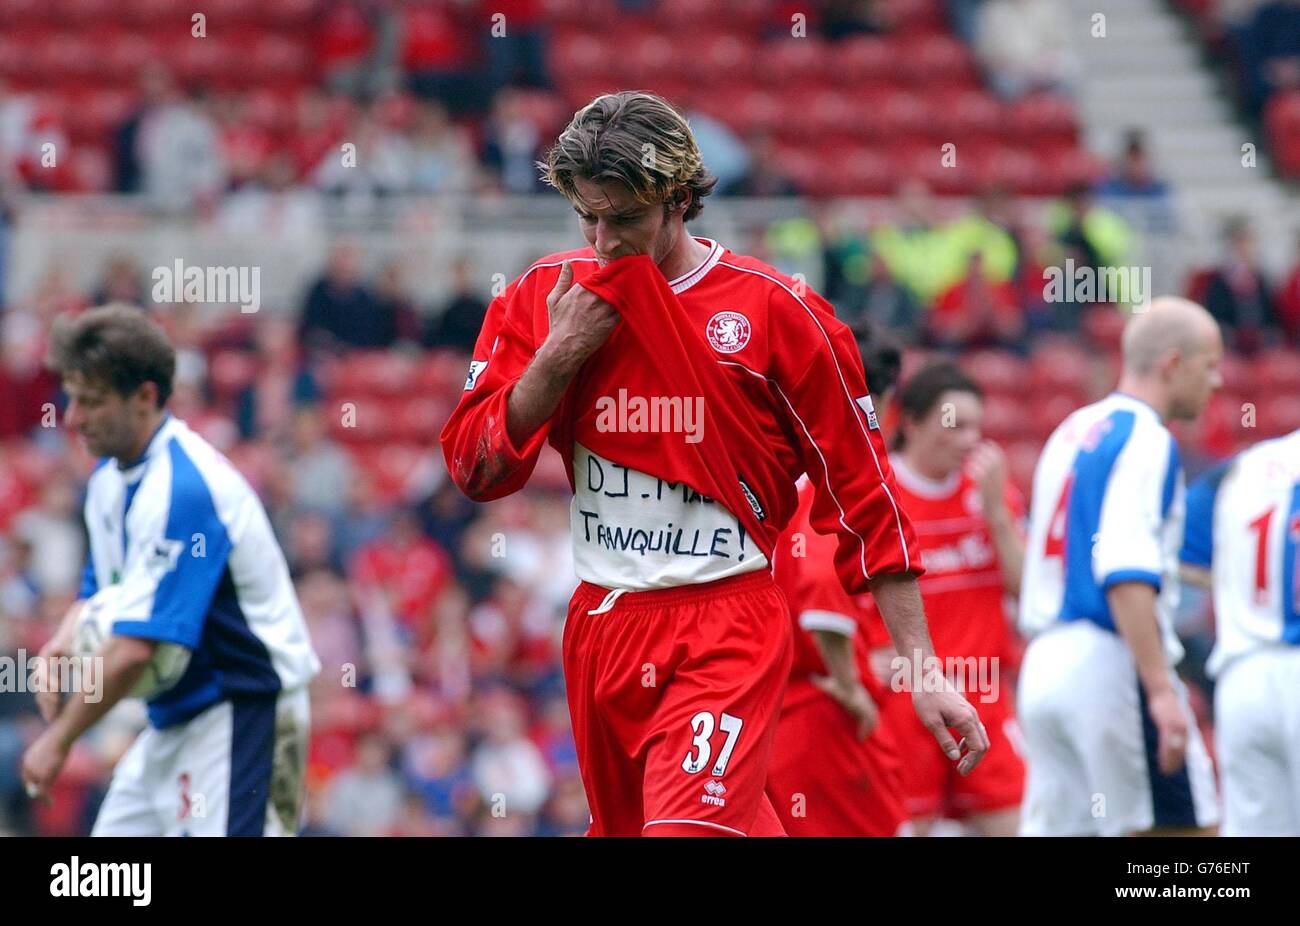 Middlesbrough's Franke Quadrue walks off the pitch after receiving a red card during the FA Barclaycard Premiership match against Blackburn at Boro's Cellnet Riverside Stadium. Middlesbrough v Blackburn Rovers. Stock Photo